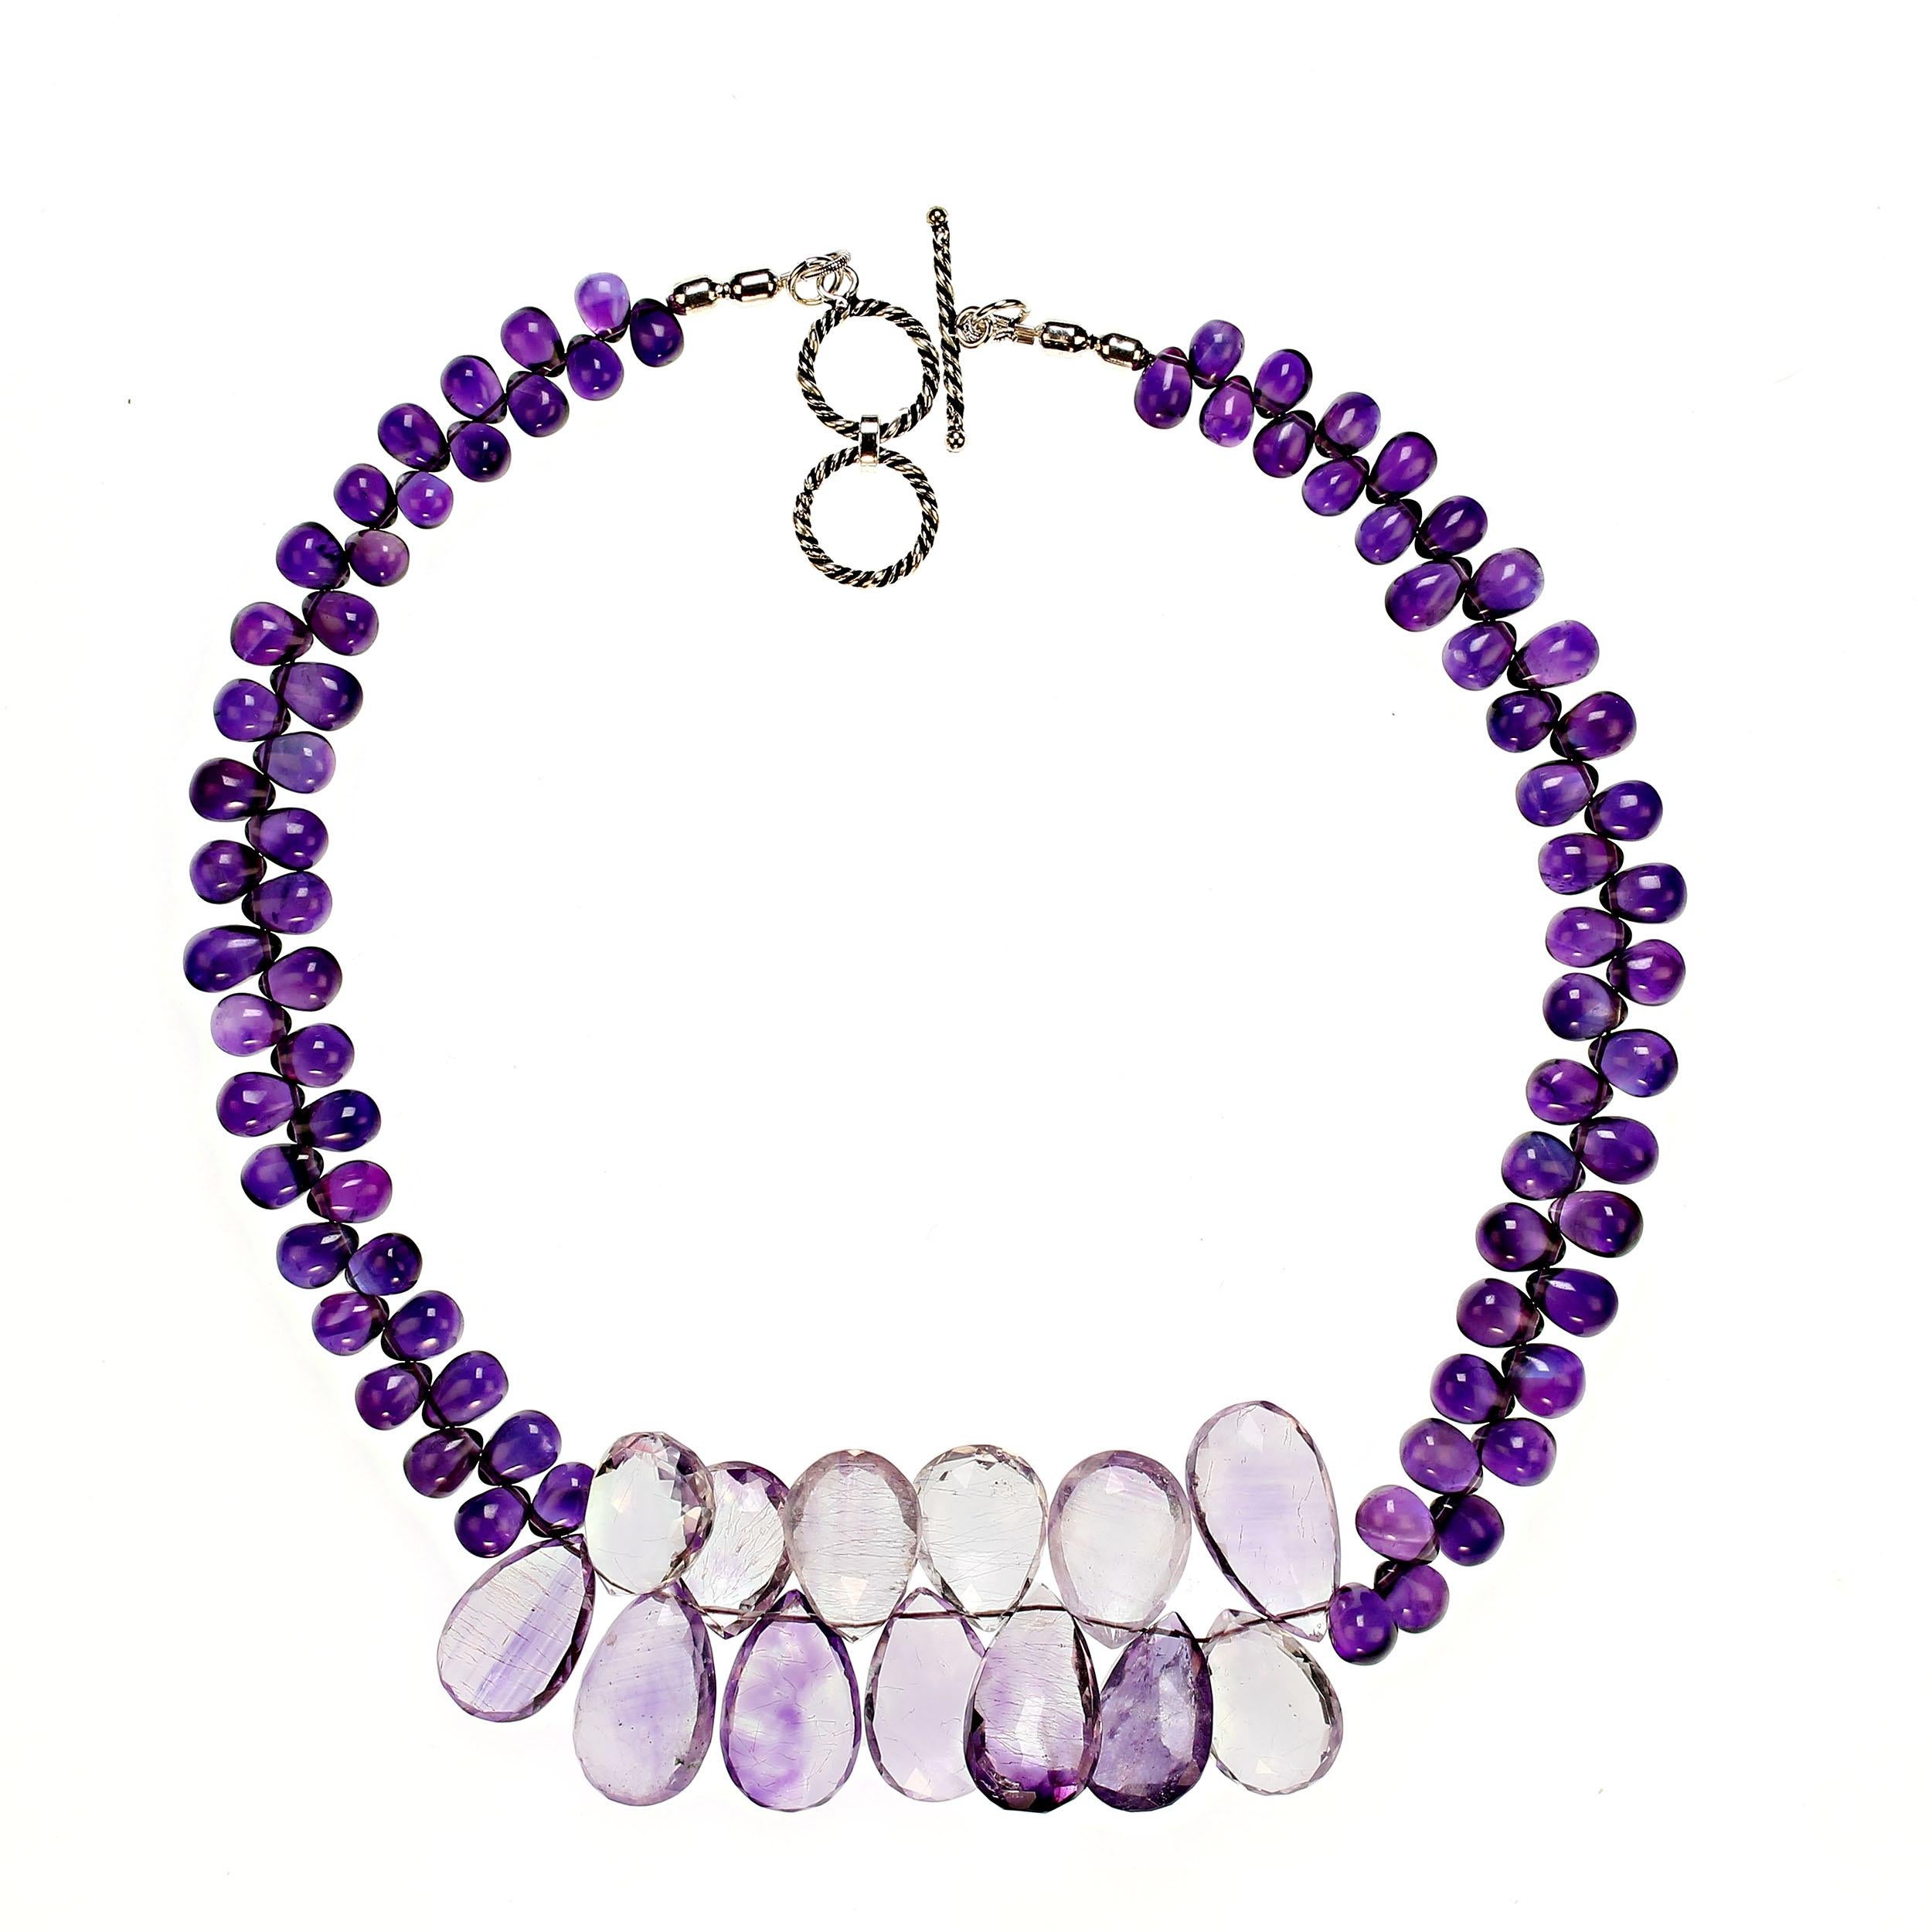 17 Inch unique and exquisite amethyst necklace.  The large faceted moss amethyst briolettes across 3 inches of the front of the necklace are sparkling. The entire remainder of the 17 inch necklace are glowing smooth amethyst broilettes. The necklace